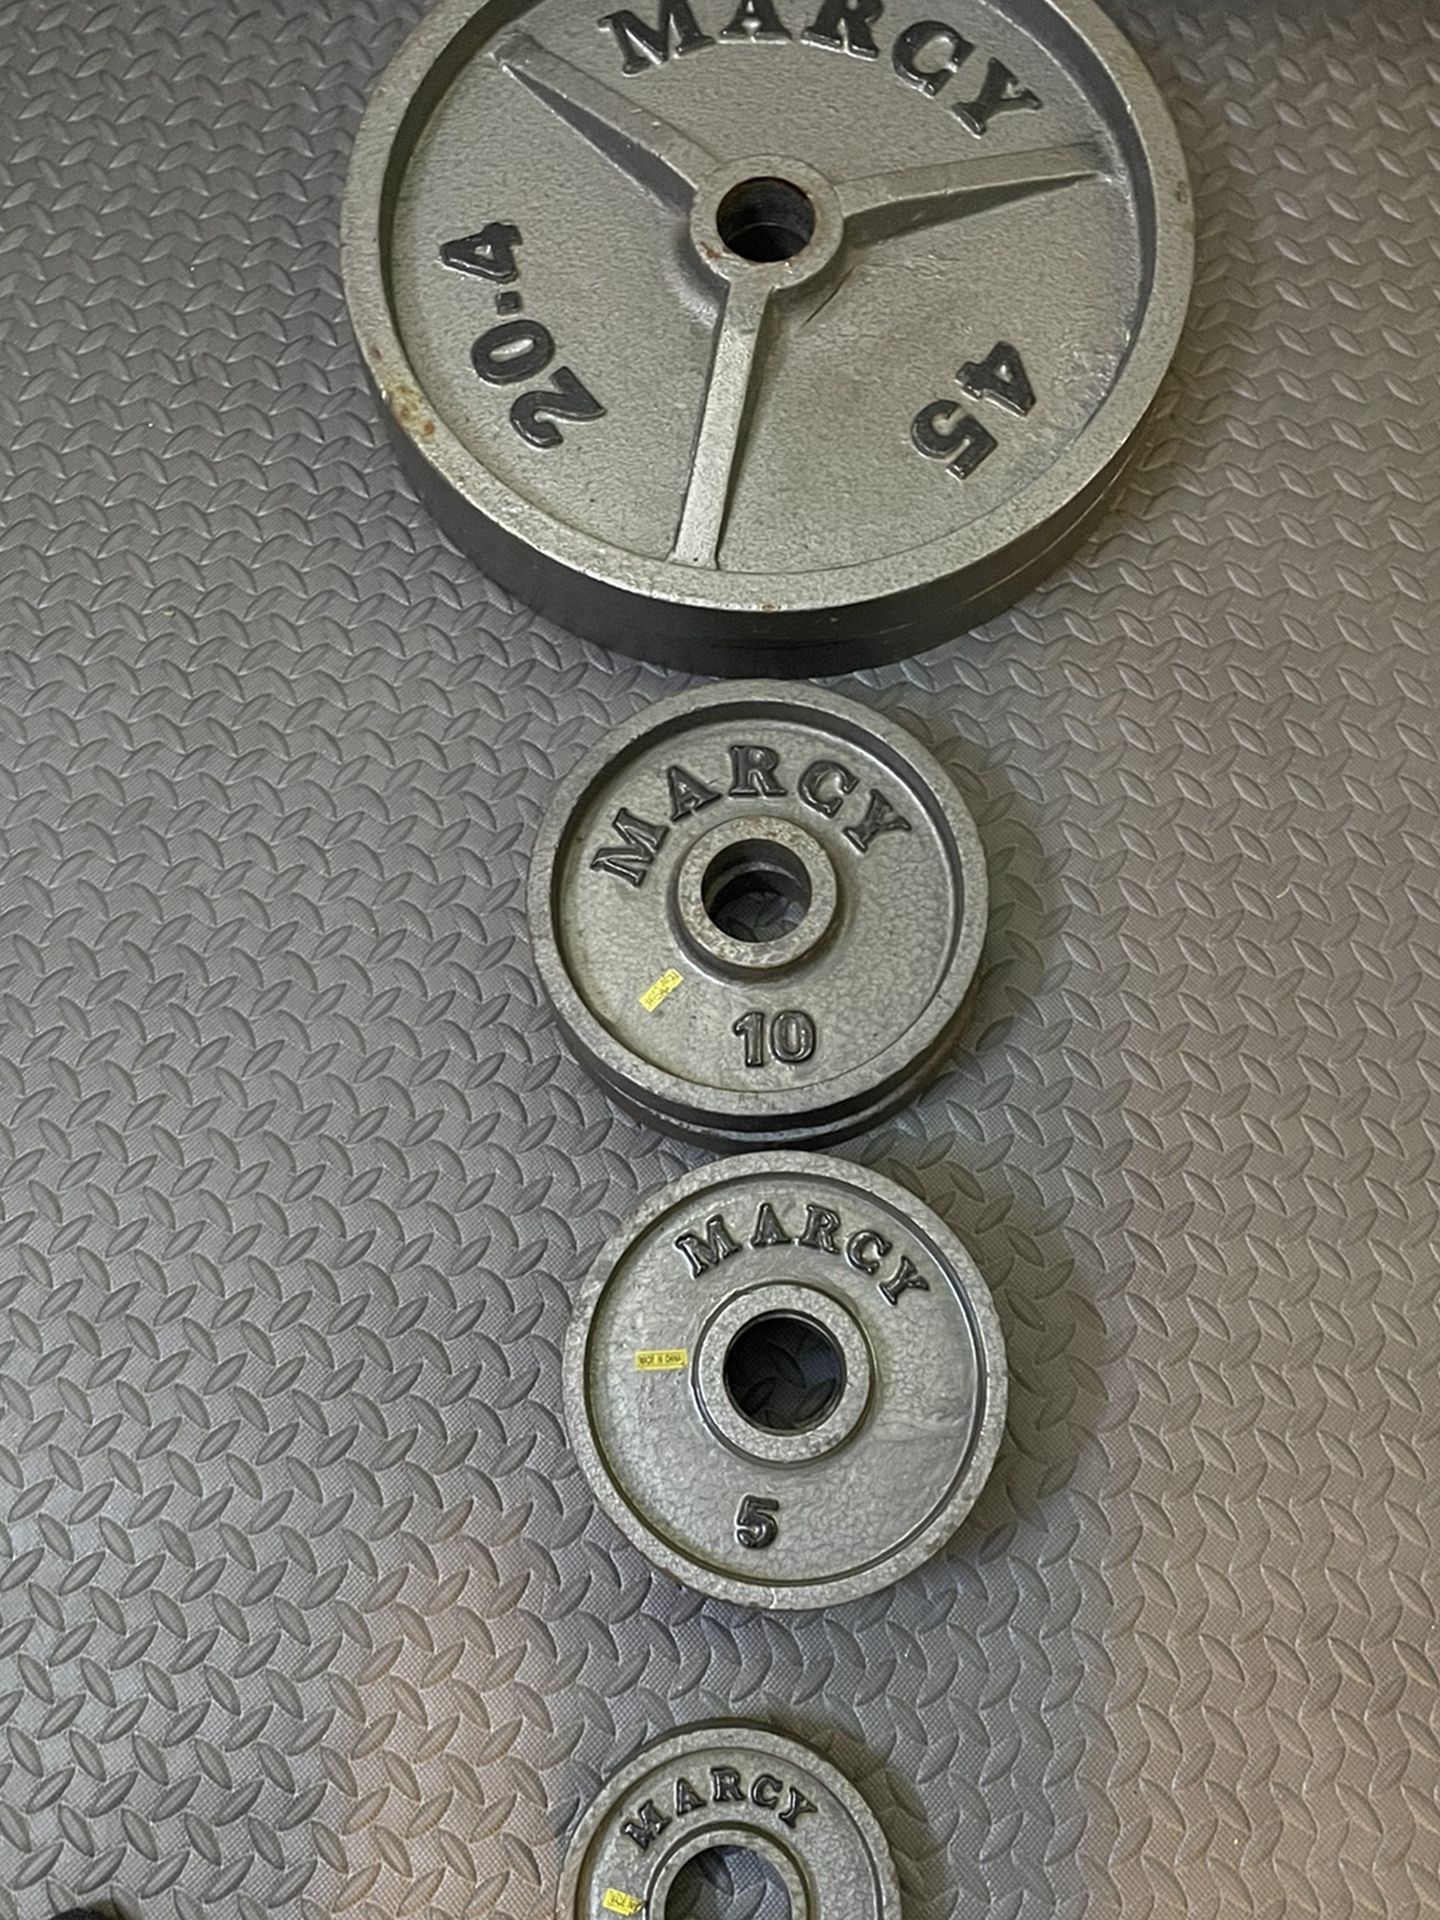 Olympic Marcy Weights